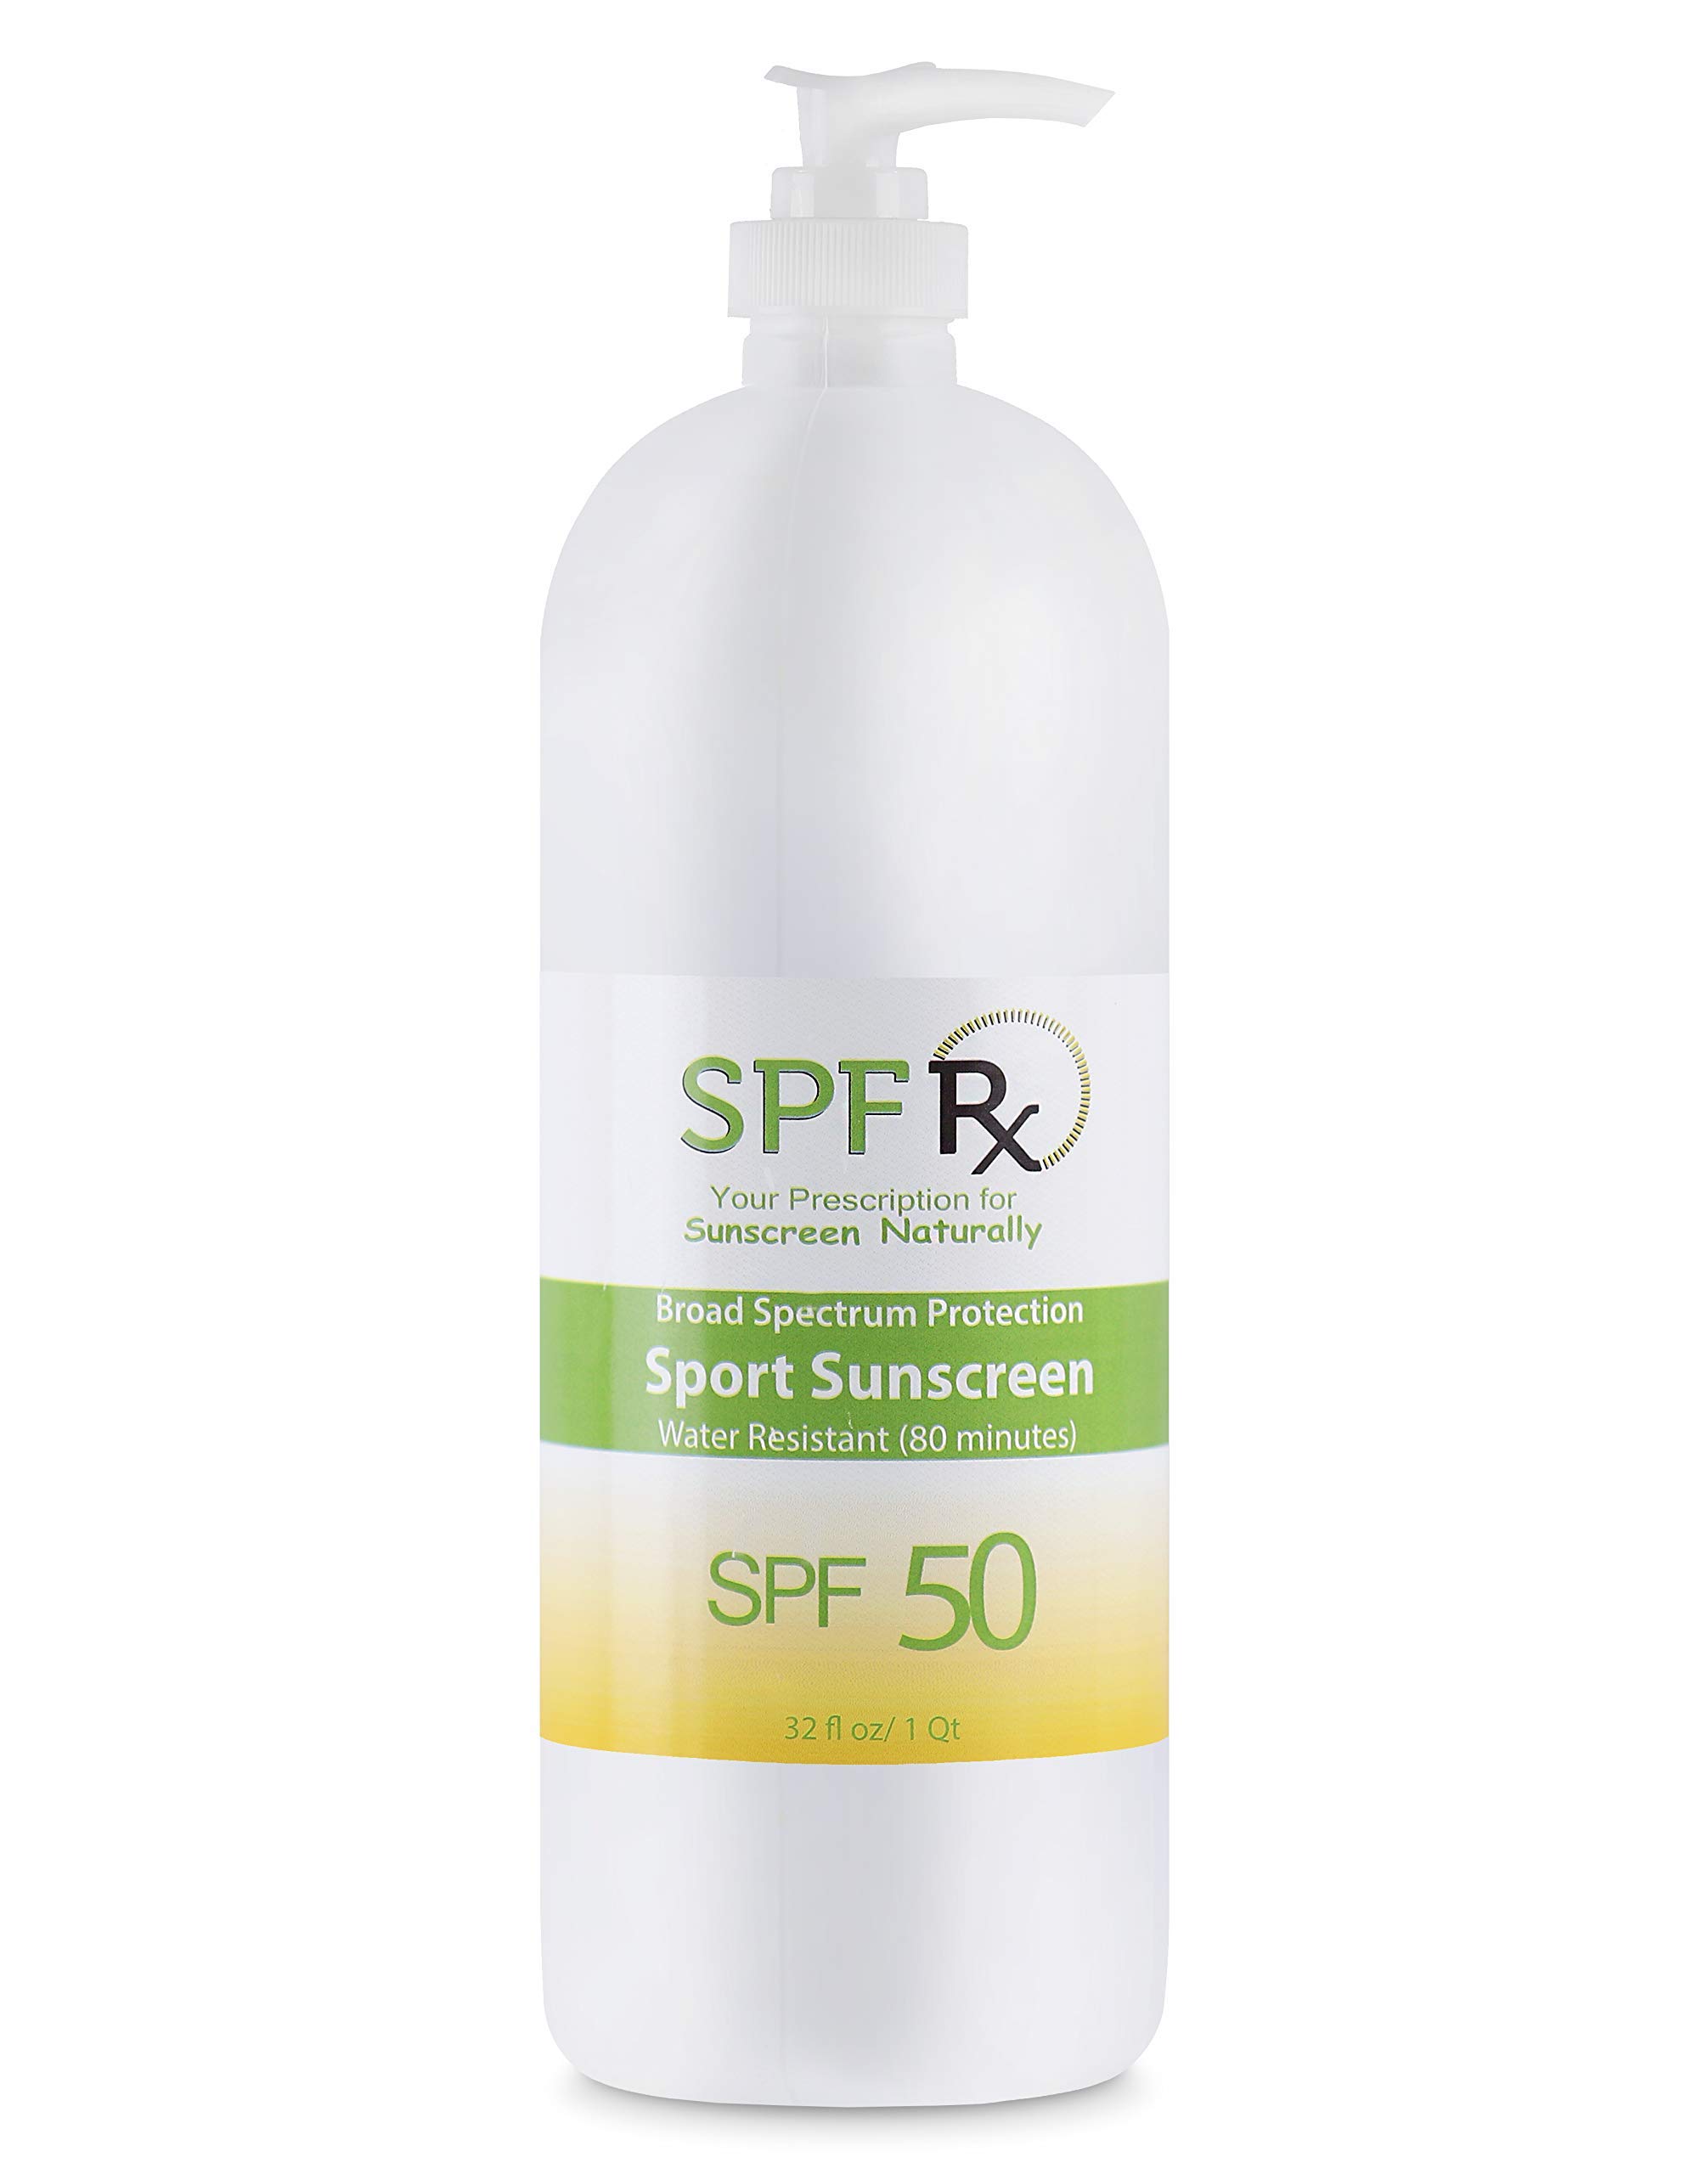 SPF Rx, SPF 50 Sport Sunscreen, Broad Spectrum Sun Protection with Active Dry Protect Formula, Non-Greasy Sport Sunblock, for Face and Body - 1 Quart